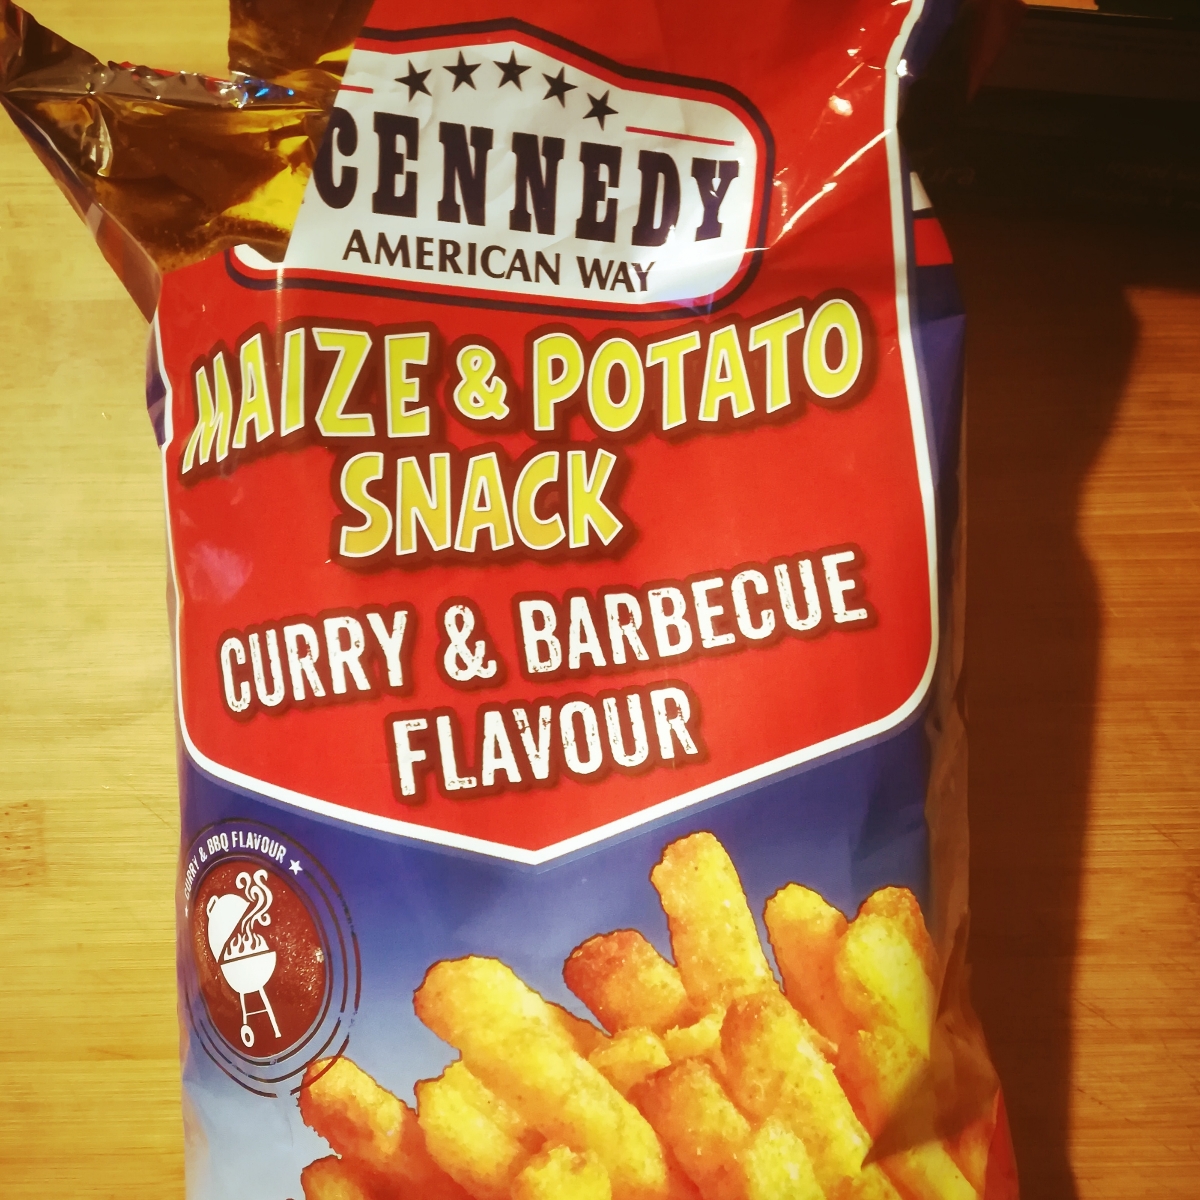 Mcennedy Maize and potato snack Curry and Barbecue flavor Review | abillion